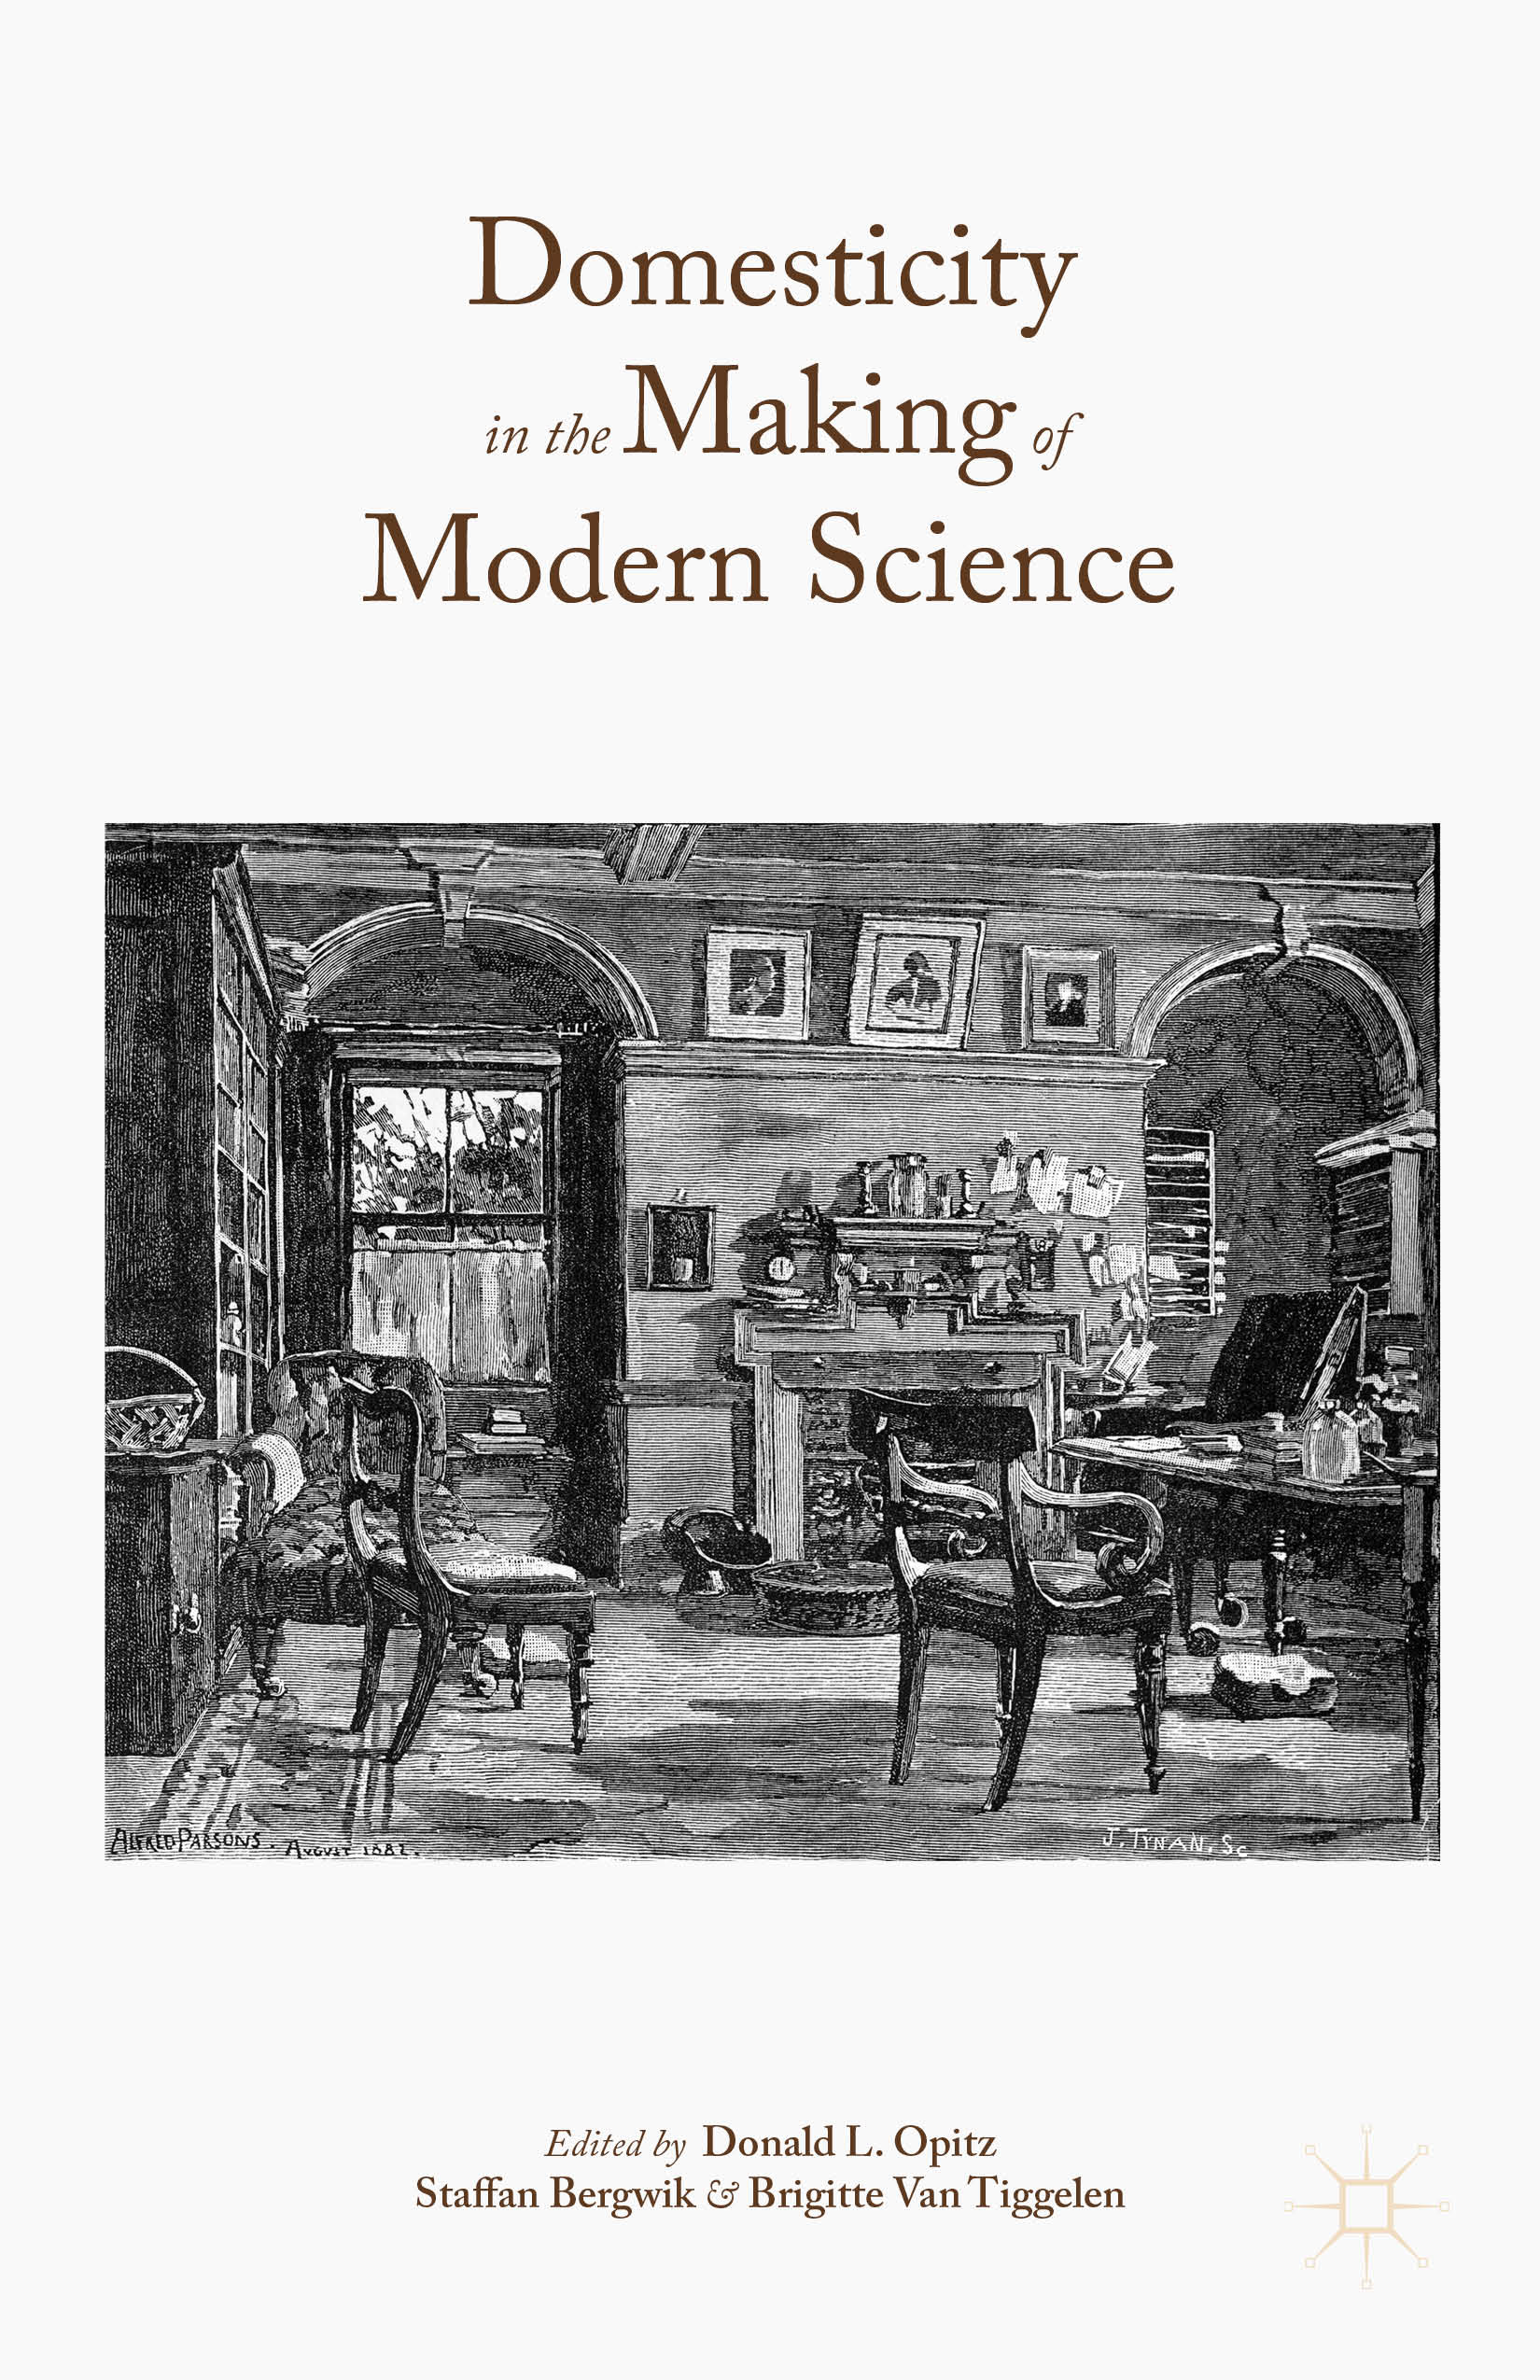 Cover of the book entitled Domesticity in the Making of Modern Science